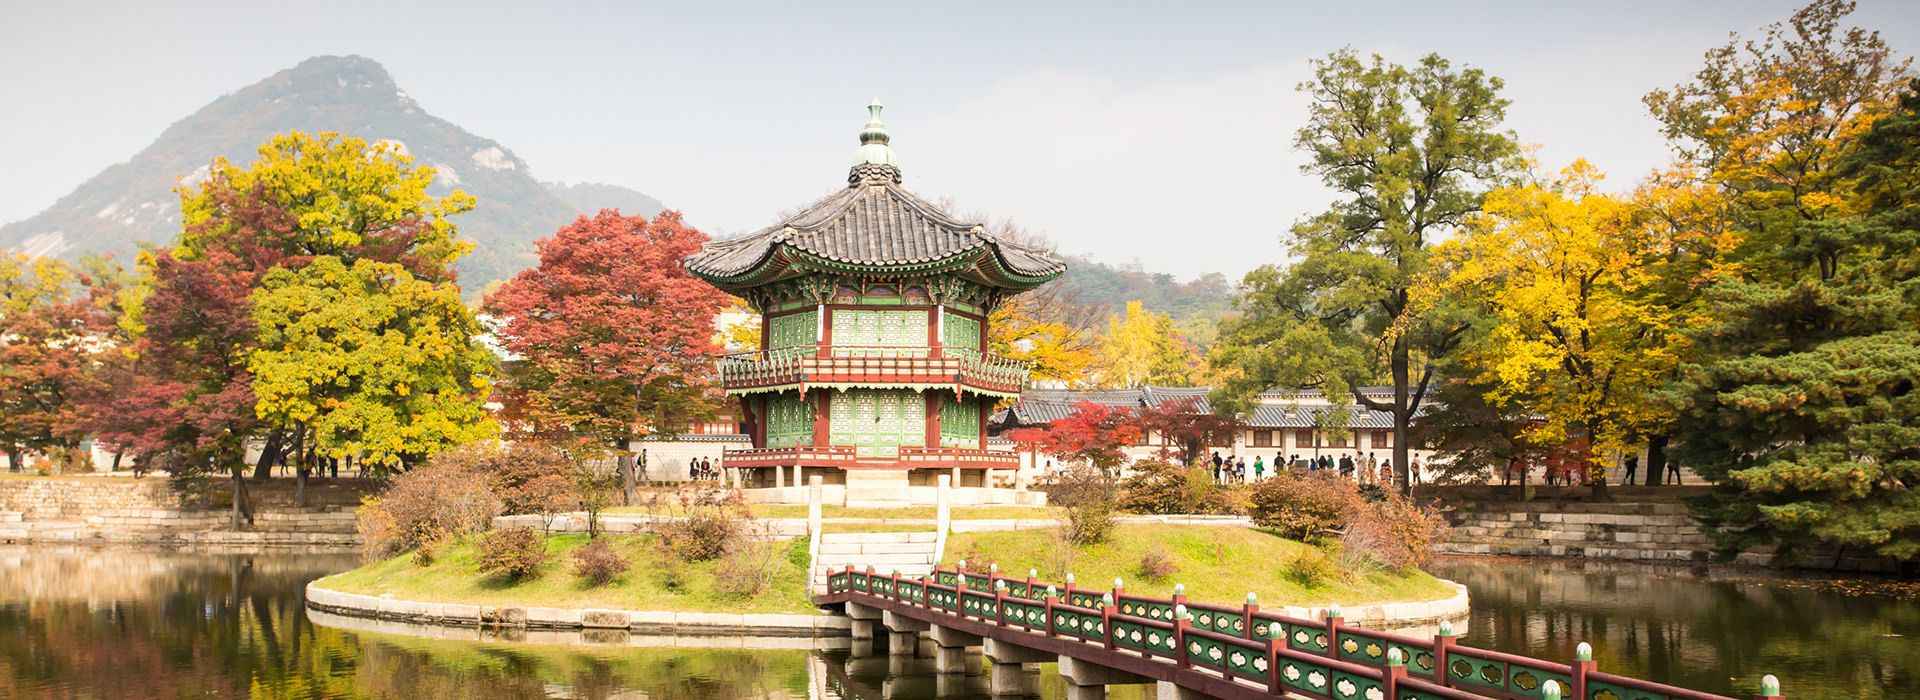 South Korea Travel Guide - Travel Insights and Tips